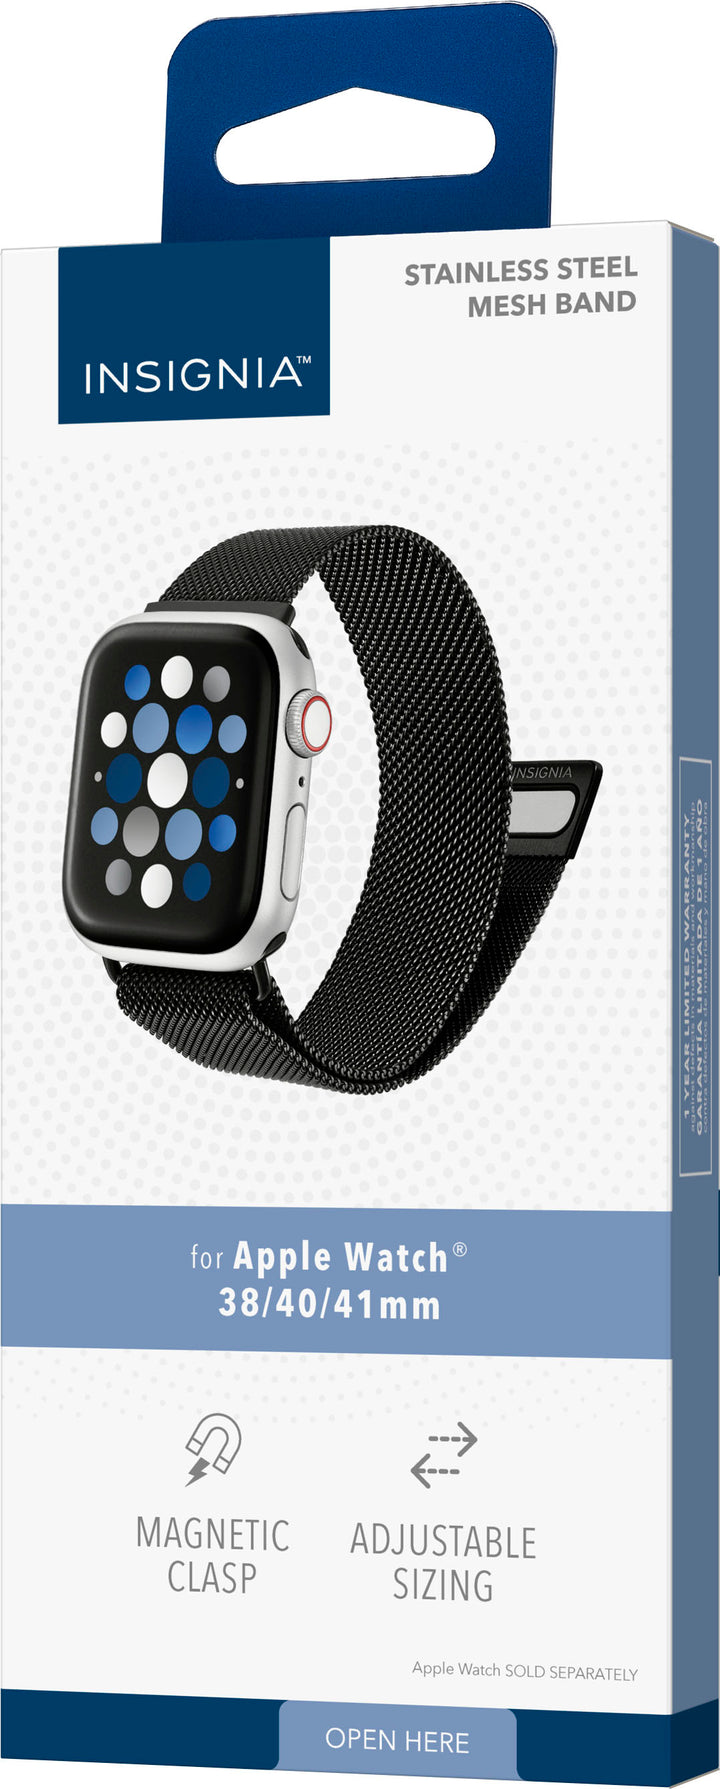 Insignia™ - Stainless Steel Mesh Band for Apple Watch 38mm, 40mm, 41mm and SE - Black_7